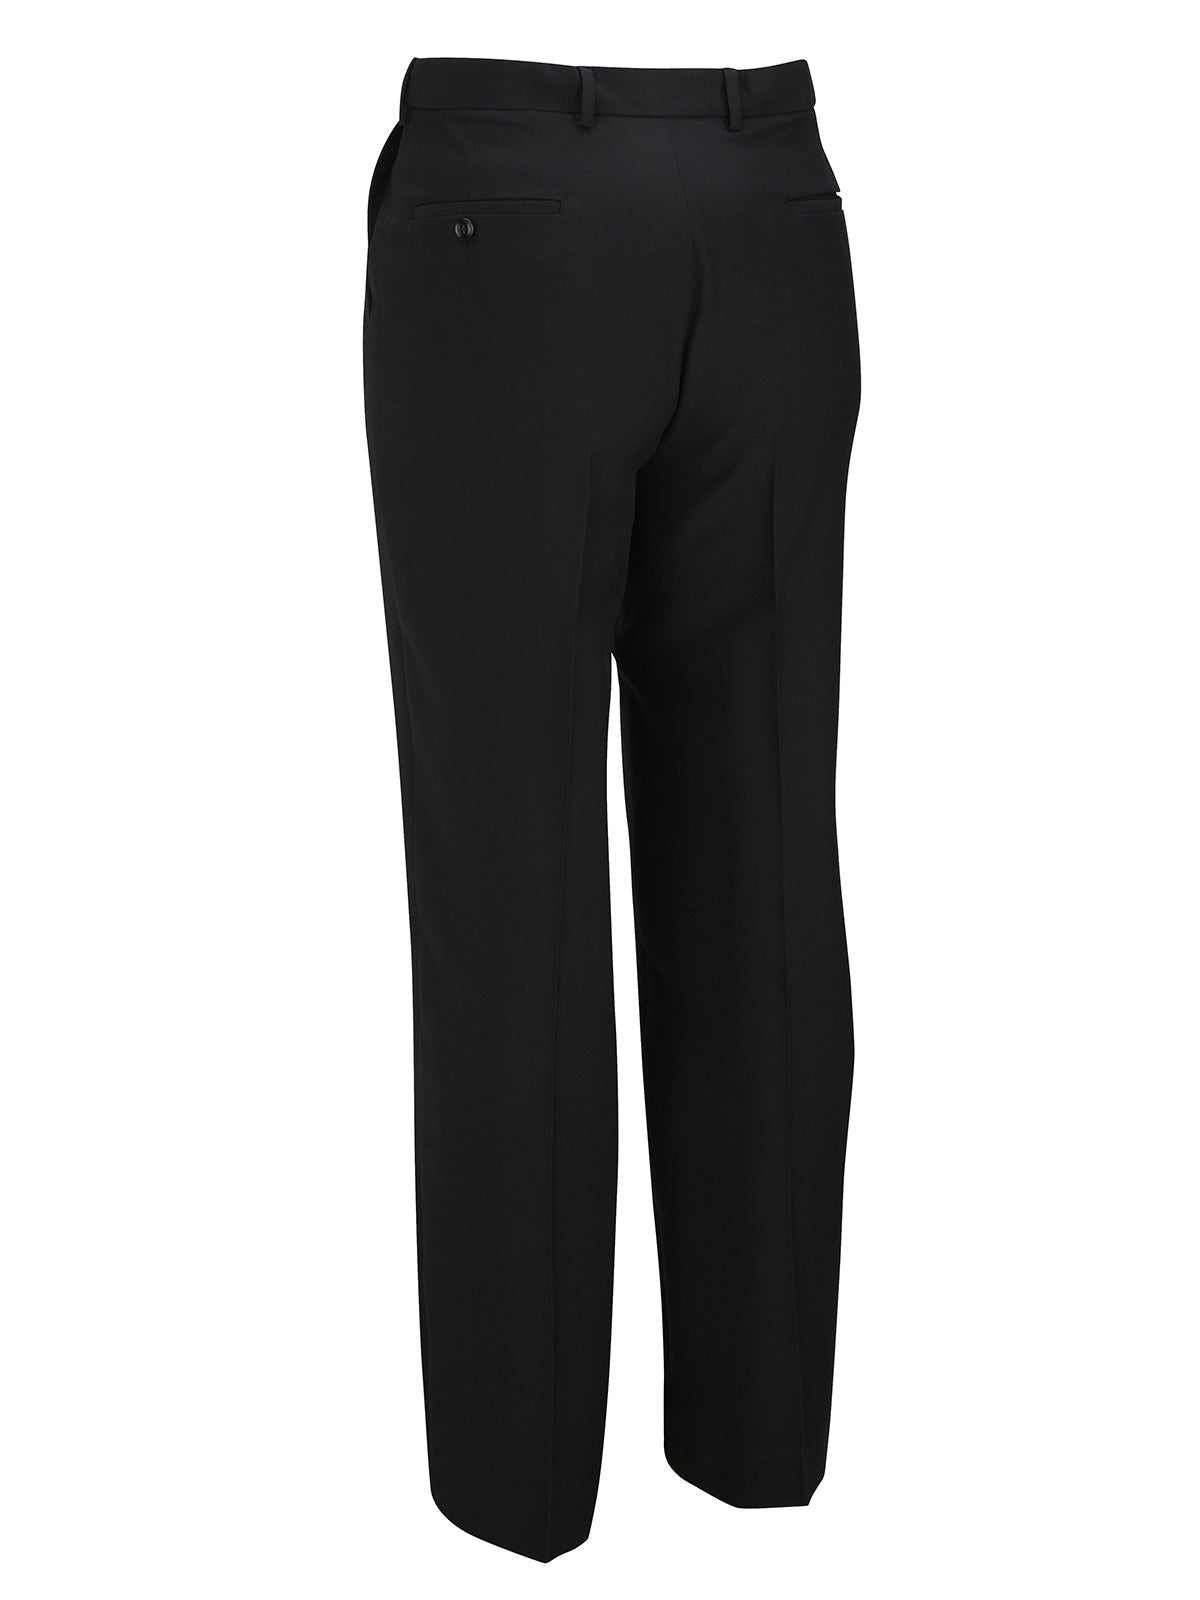 Men's Easy Fit Pant (Sizes: 42 x 35 to 58 x 30)